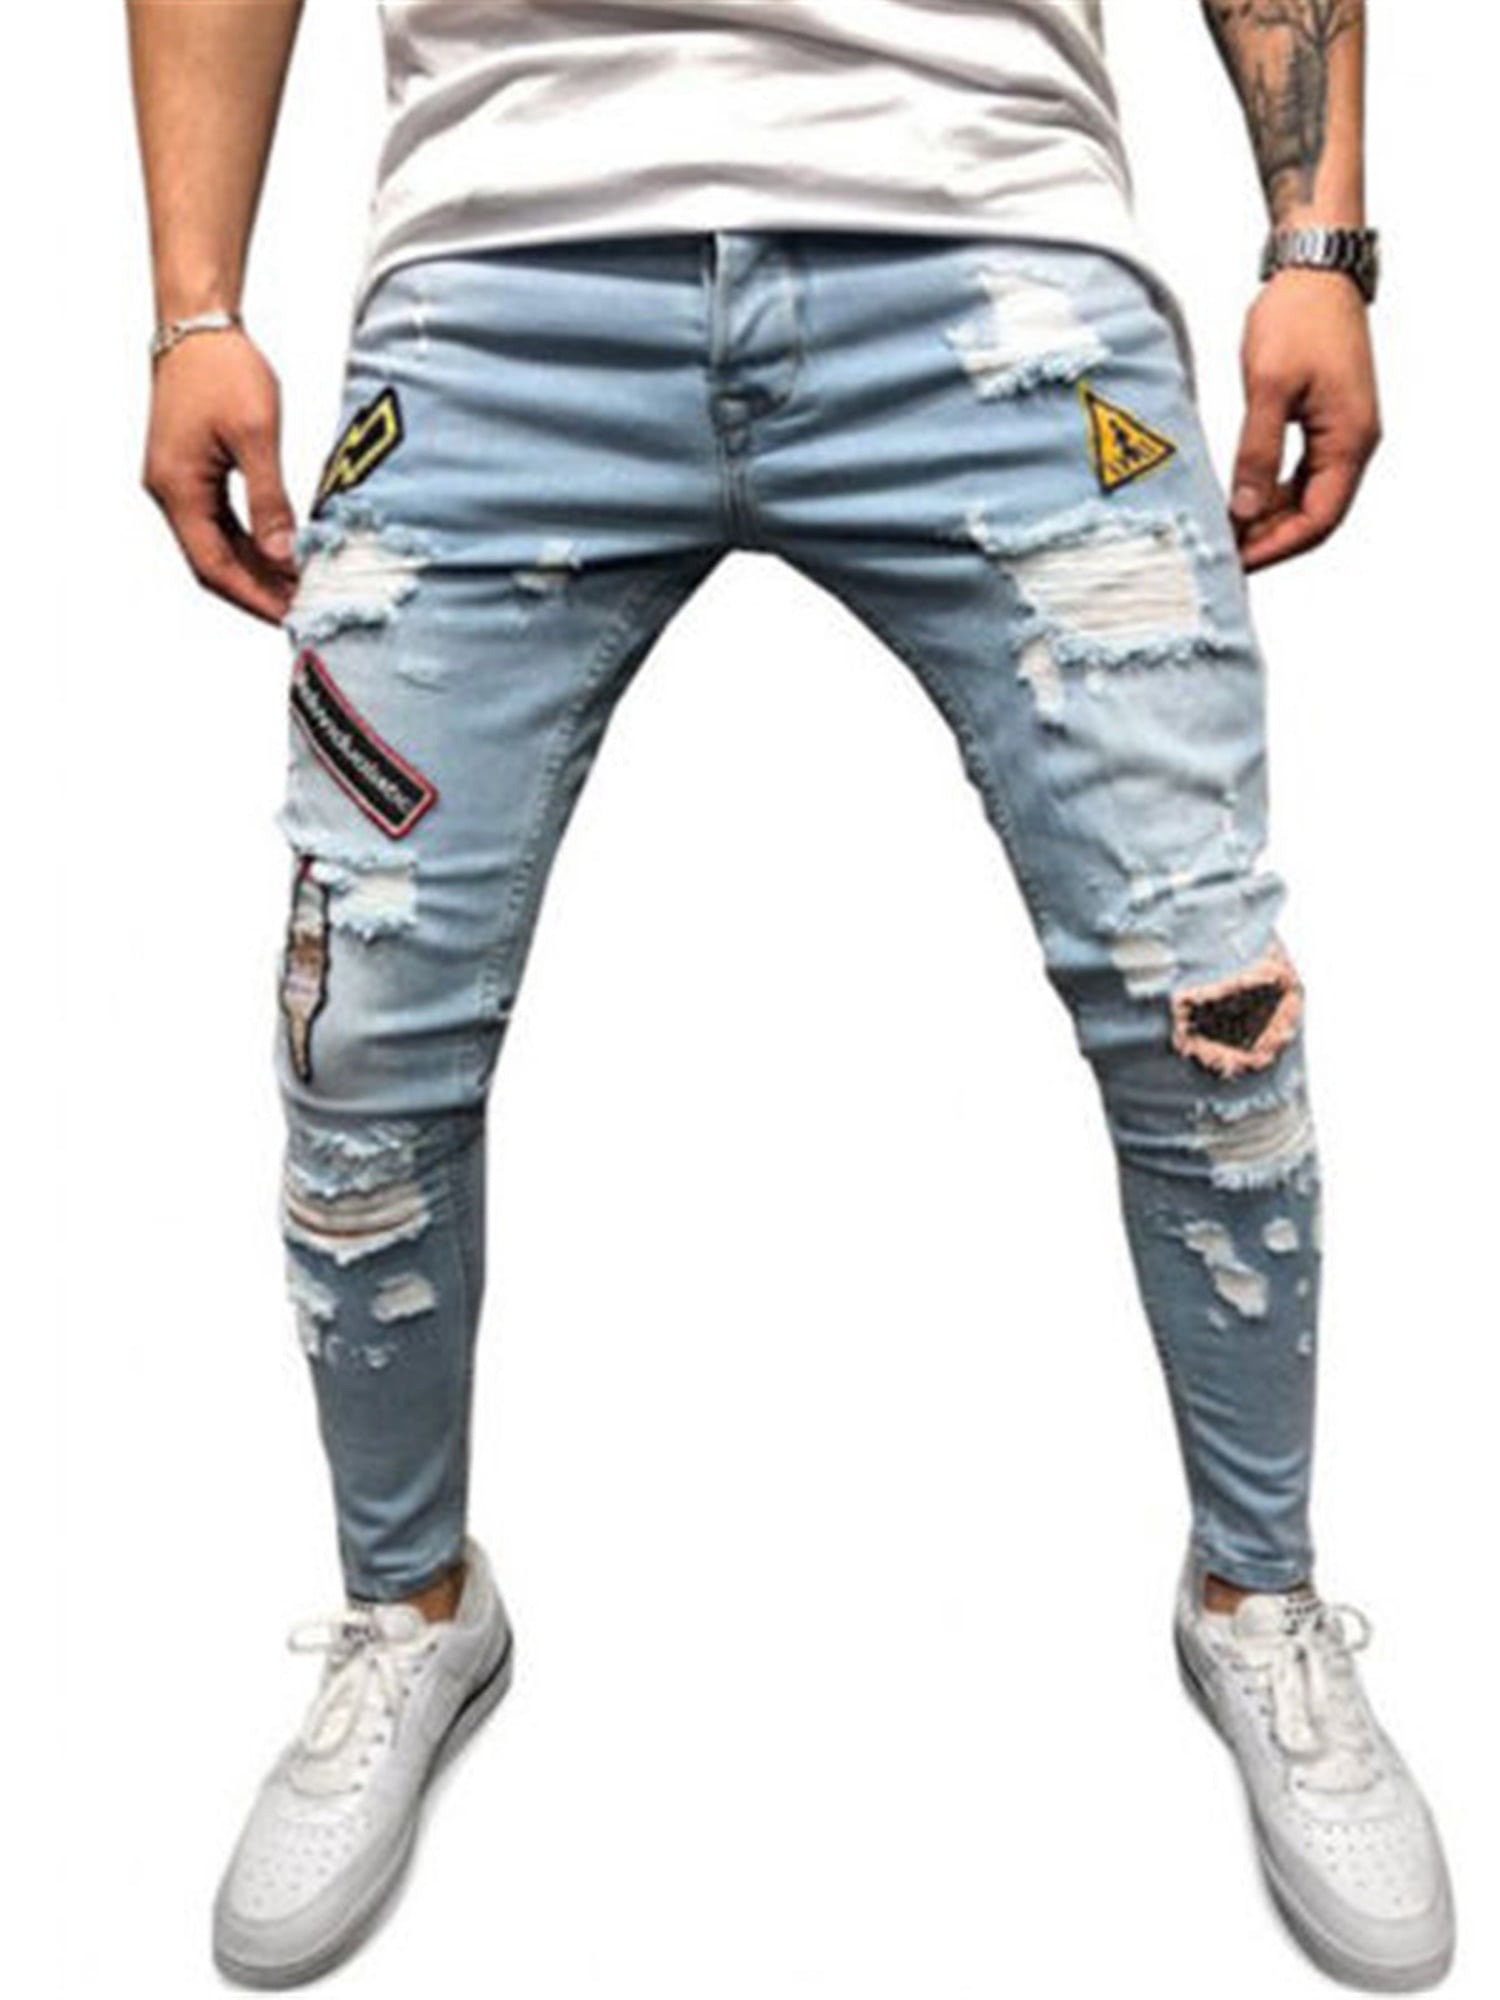 Sunisery Men's Regular Fit Stacked Jeans Patch Distressed Denim Pants Streetwear,Light Blue, Size: Small